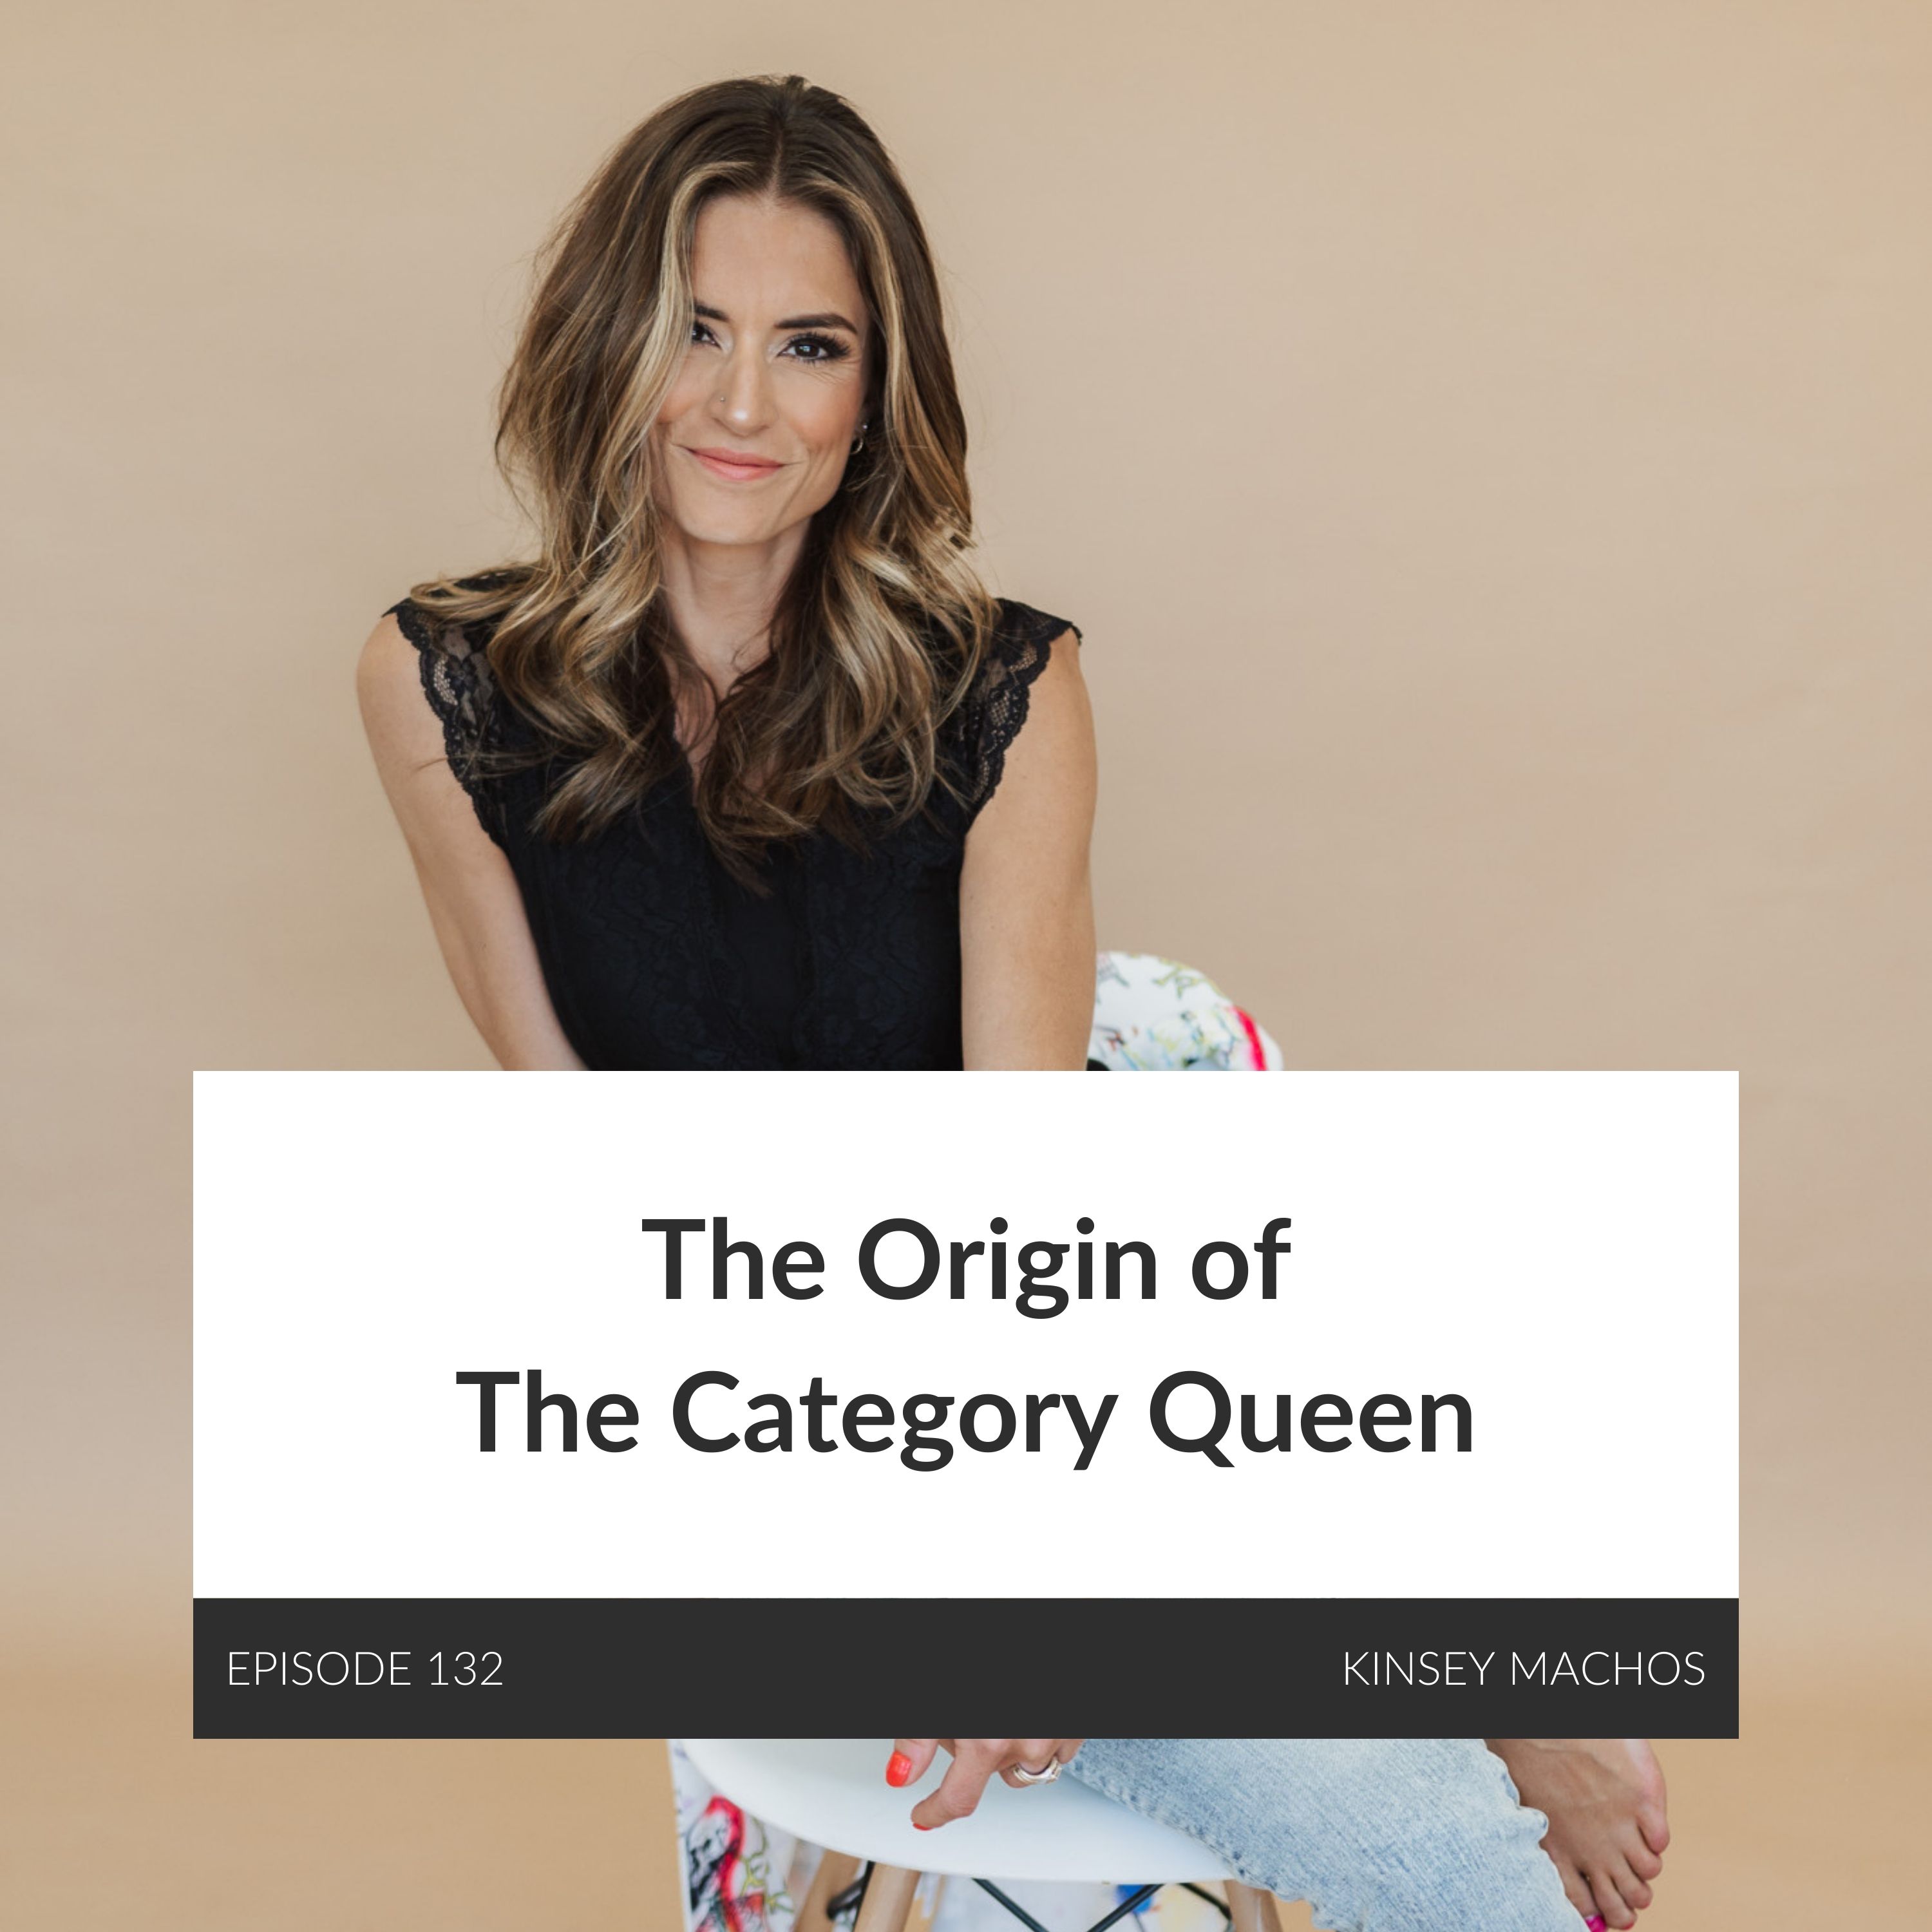 The Origin of The Category Queen